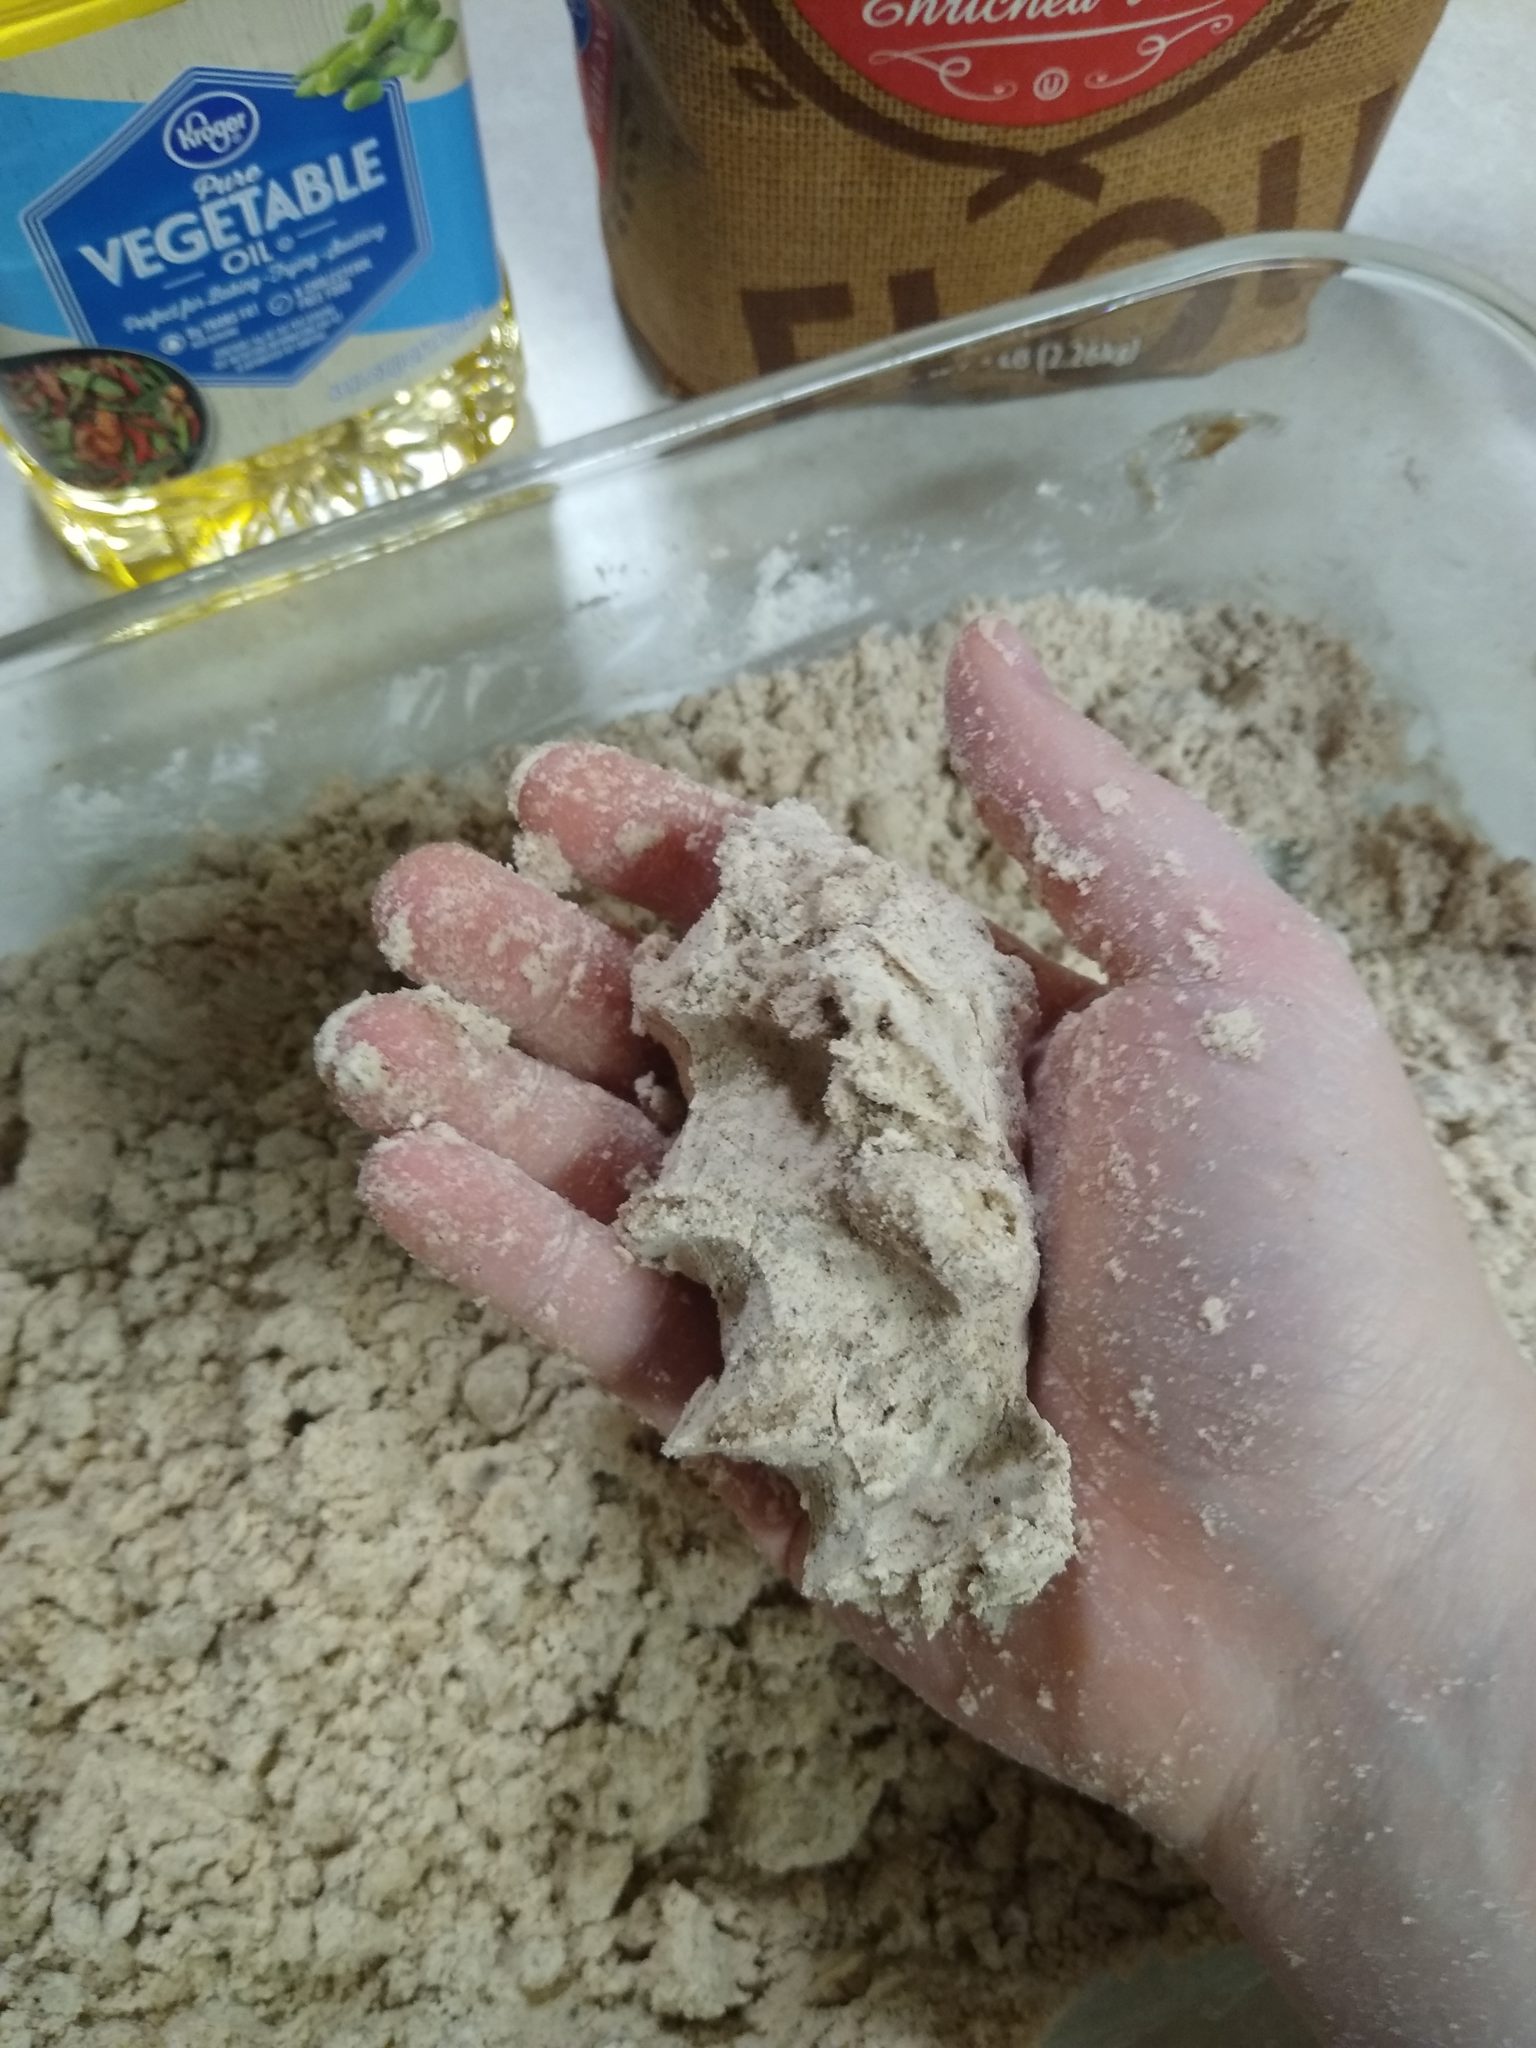 Demonstrating the ideal texture of the dough; the dough remains crumbly but can be easily compressed down by hand.